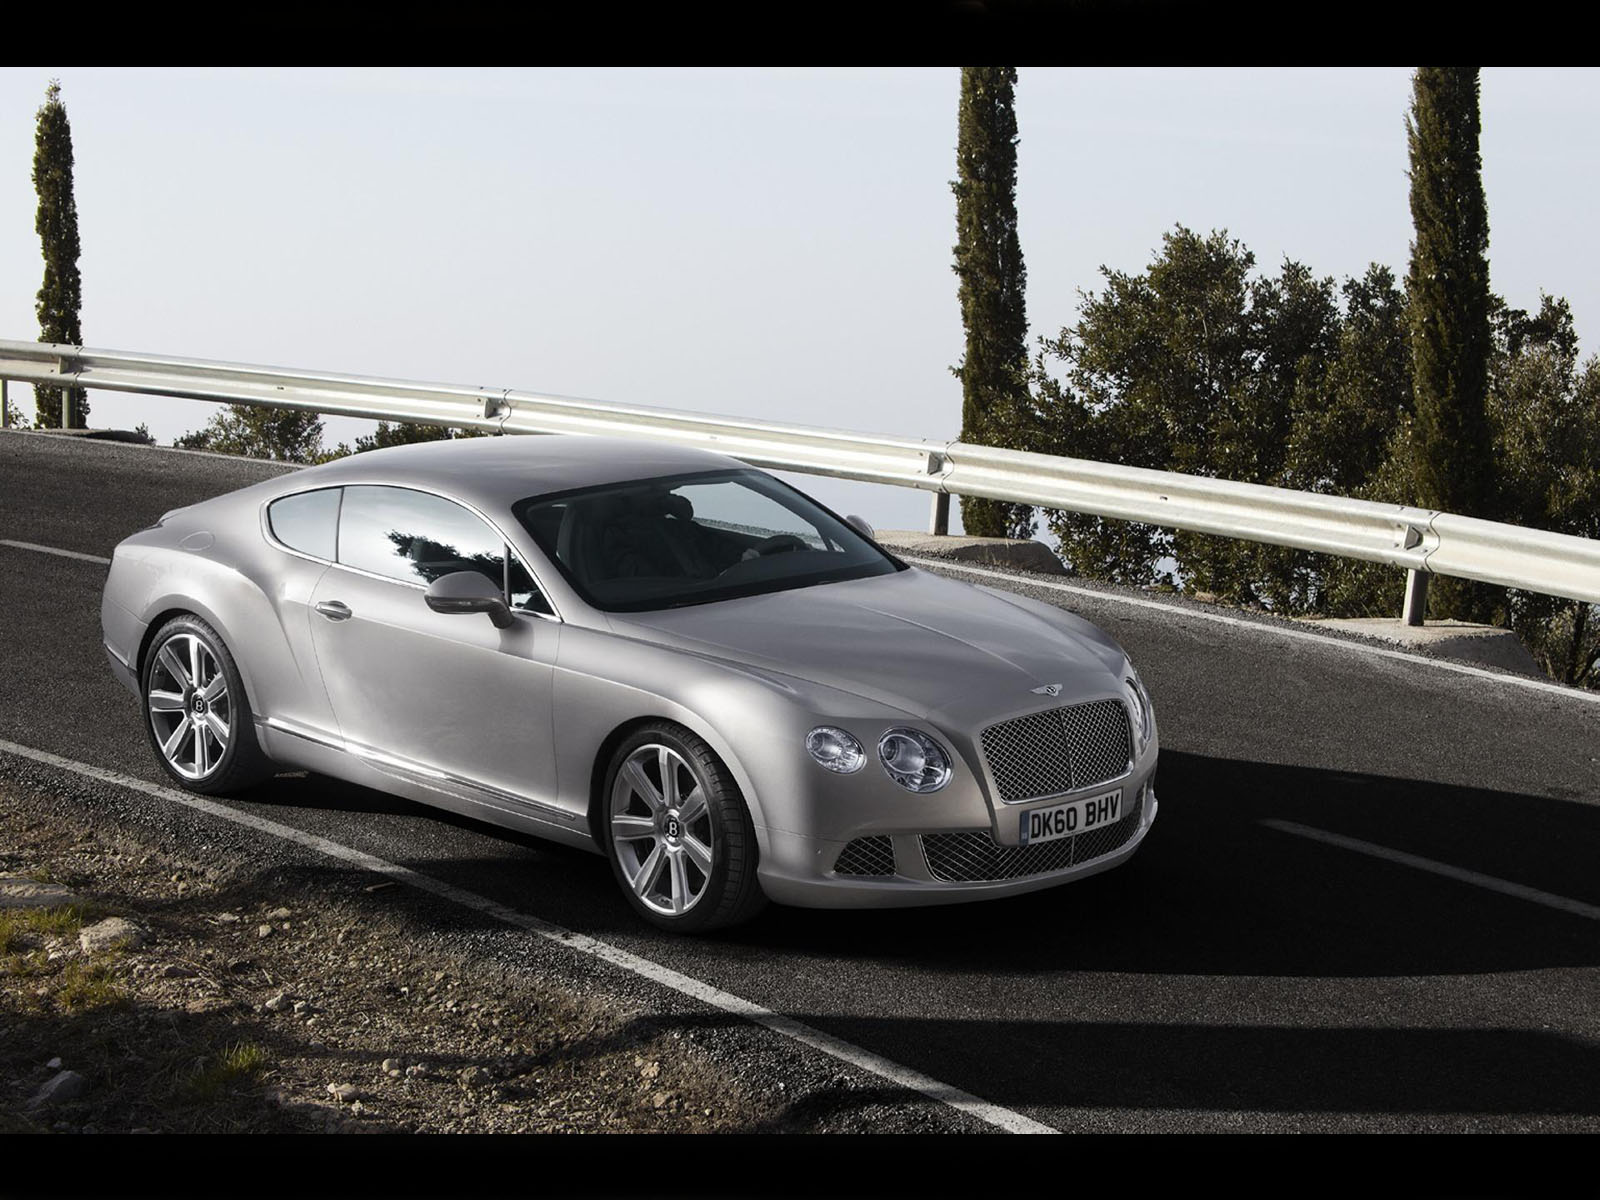 Luxurious 2012 Bentley GT Continental parked outdoors, showcasing its elegant design.